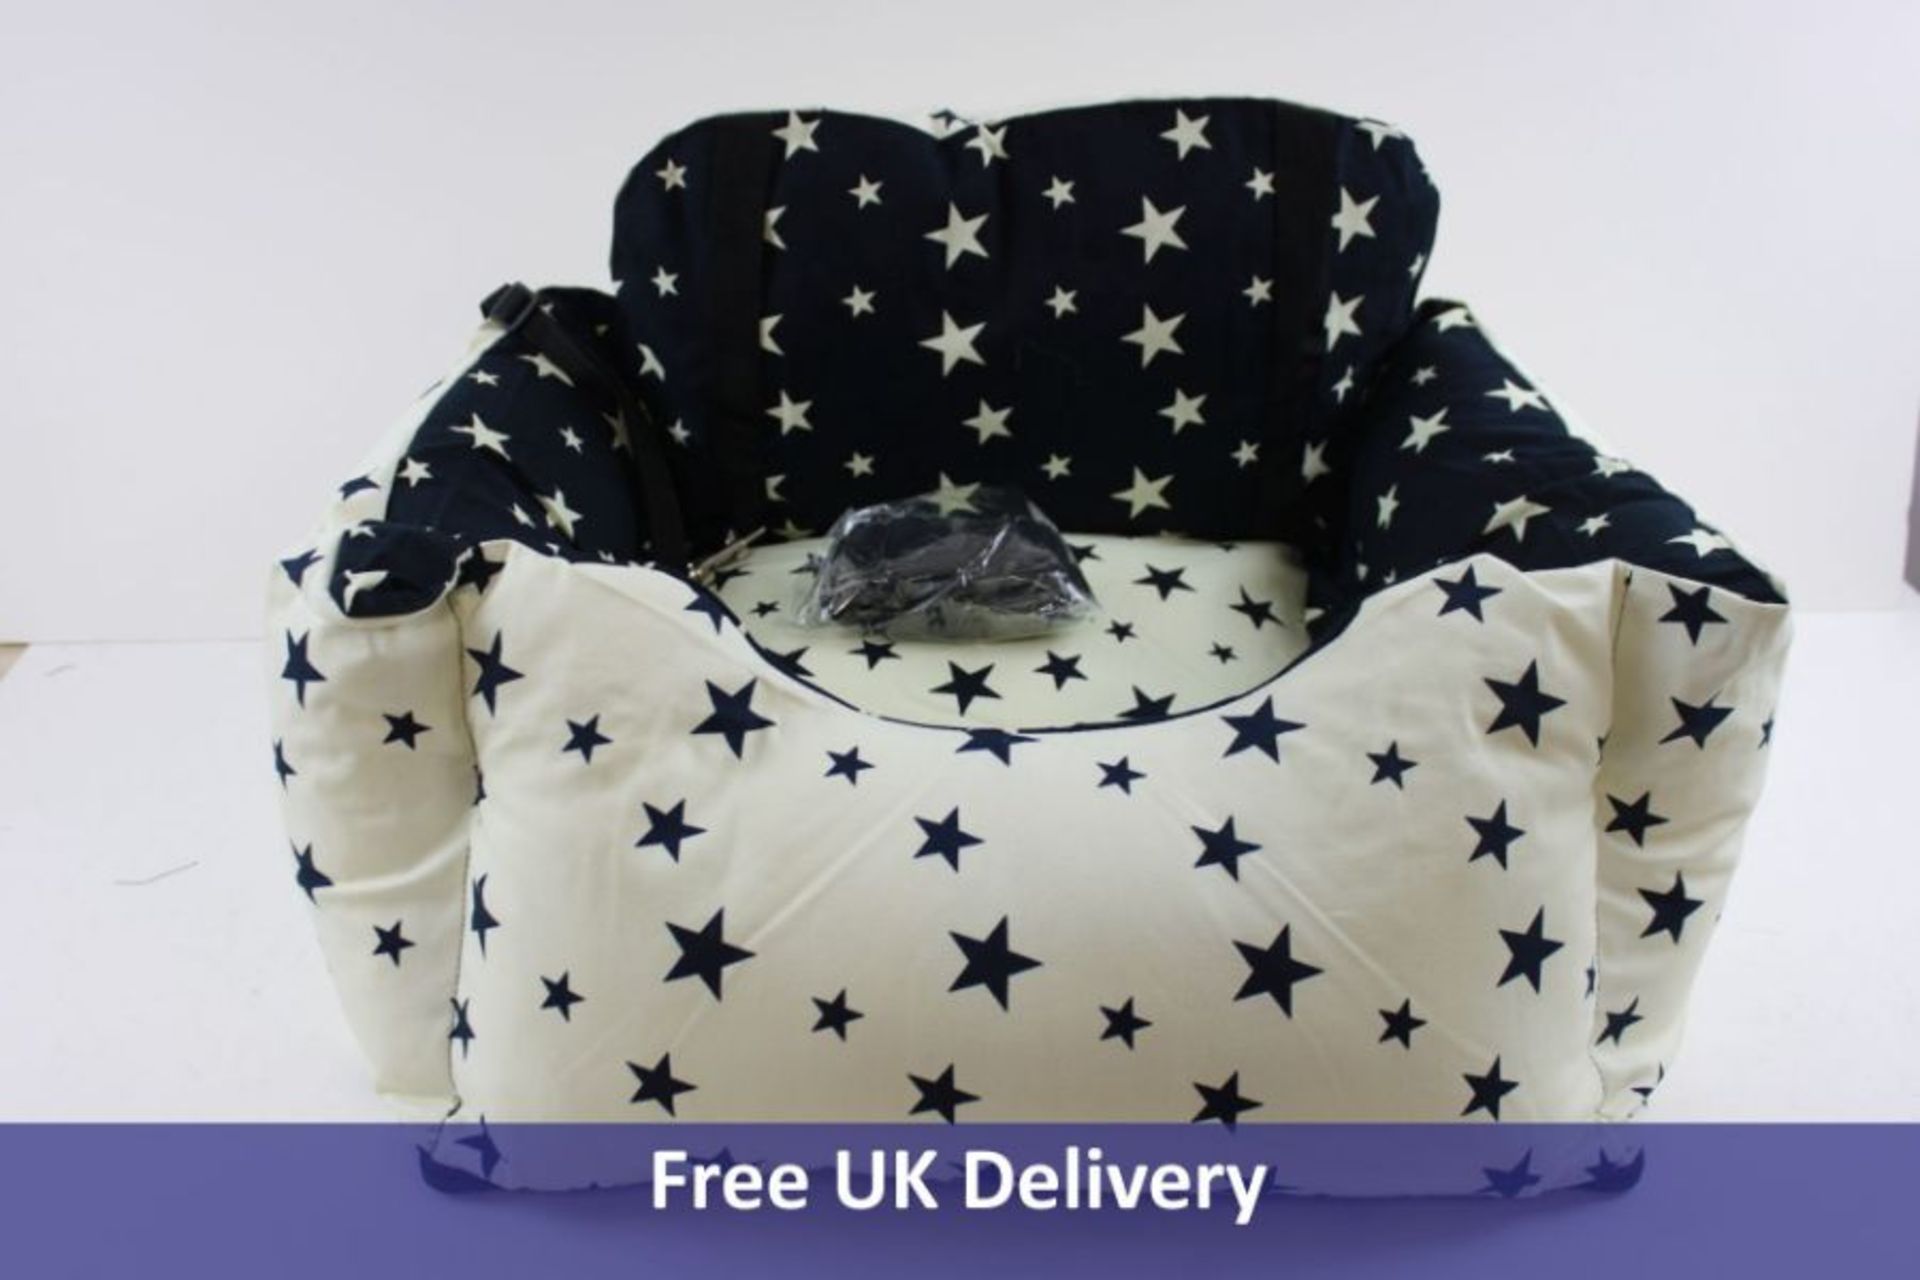 Mister Yong Car Booster Bed, 55x50x35cm, Navy with Yellow Star Design